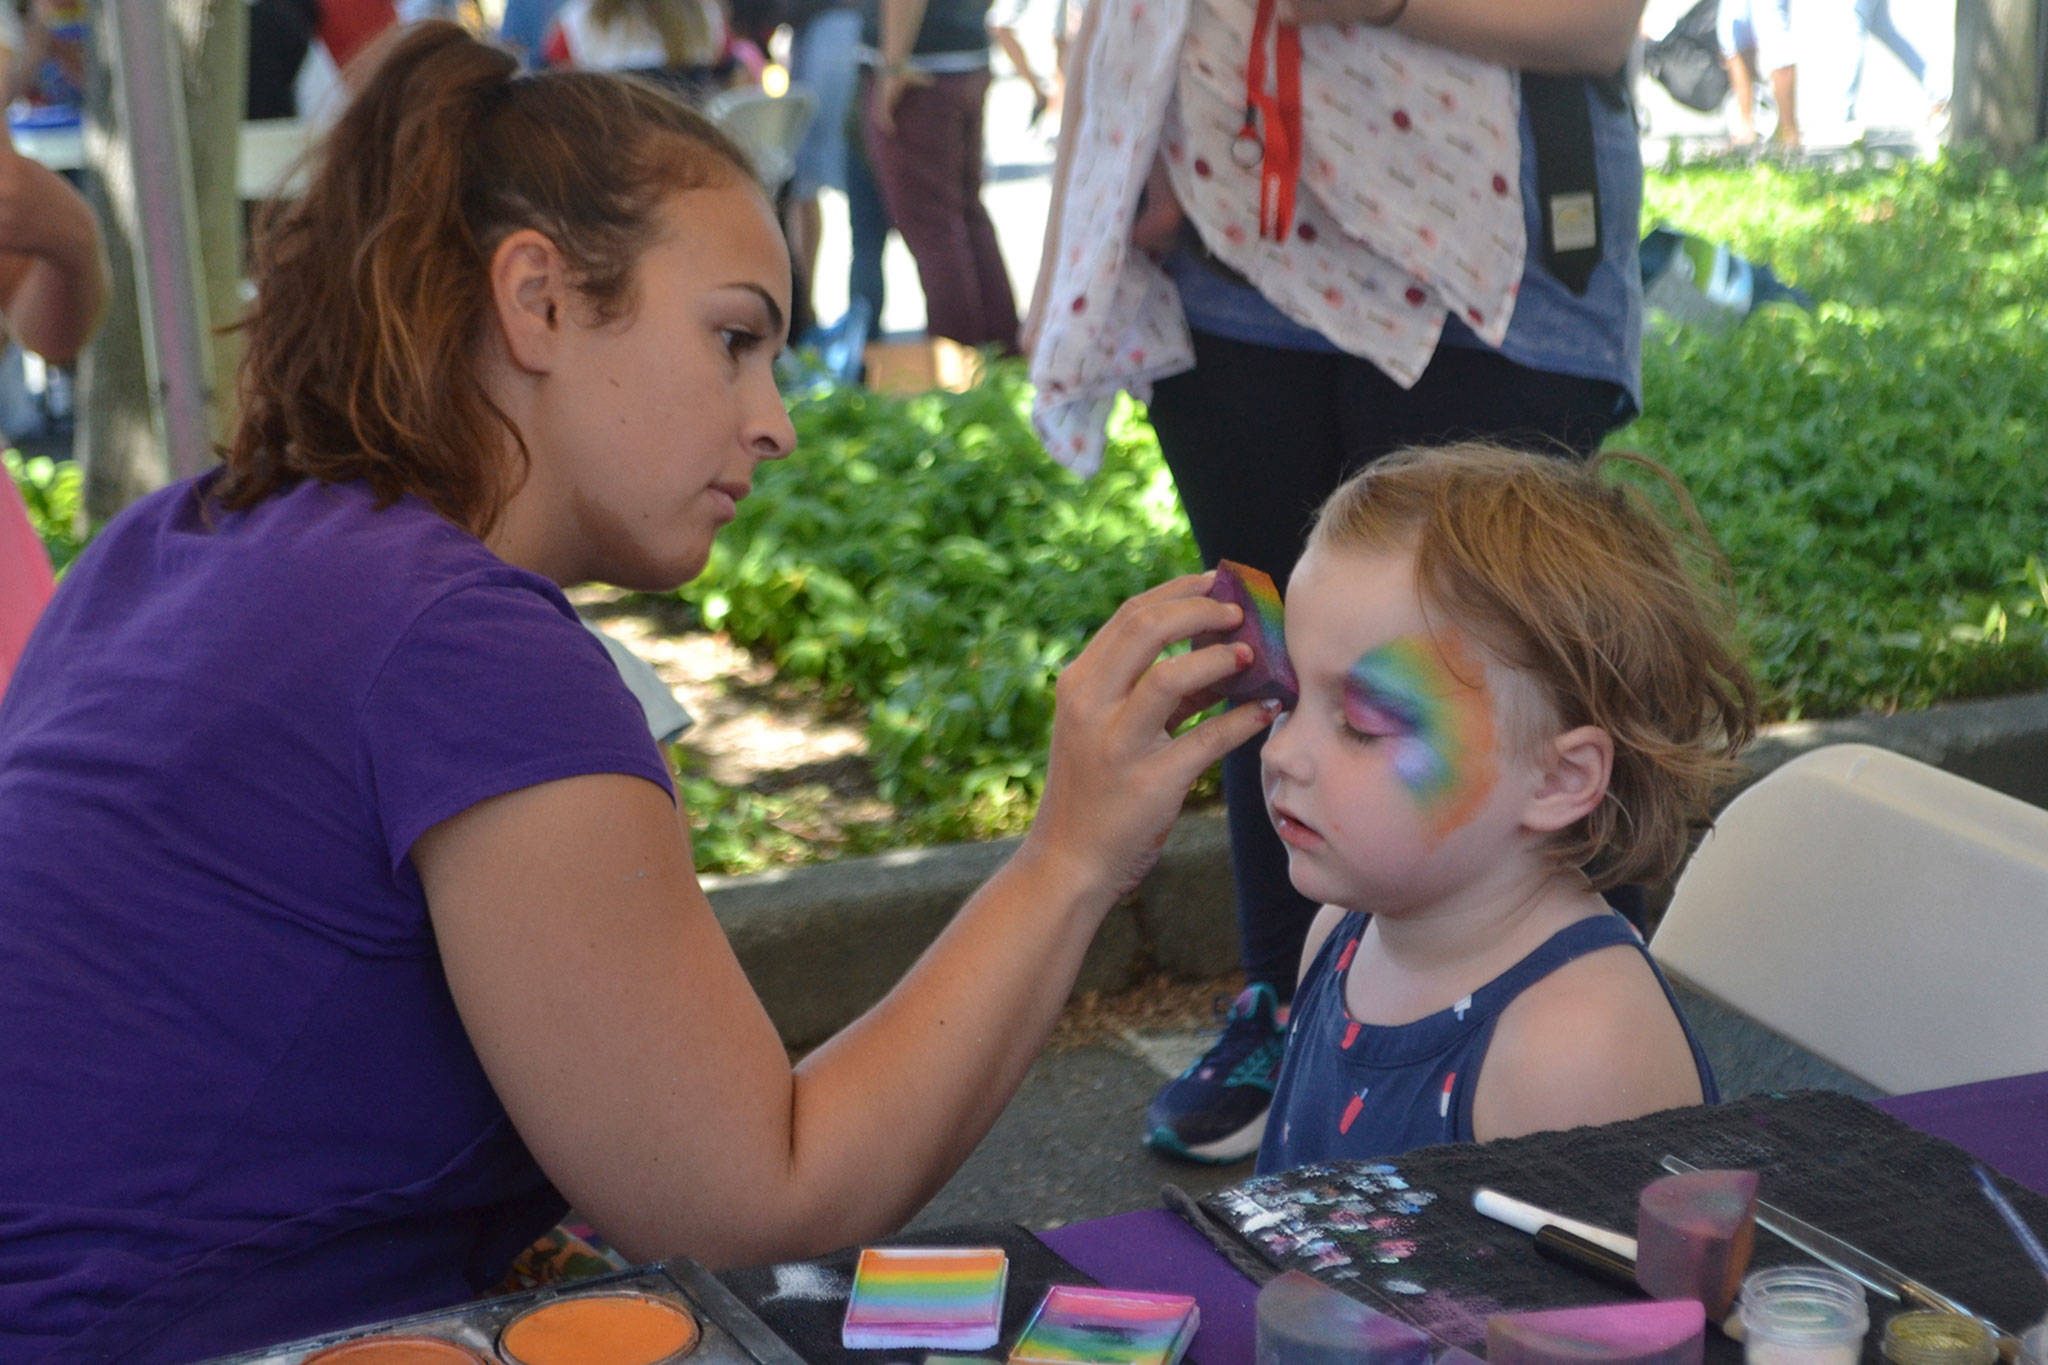 Face painting is one of the many activities for kids at Derby Days in Redmond. Katie Metzger/staff photo